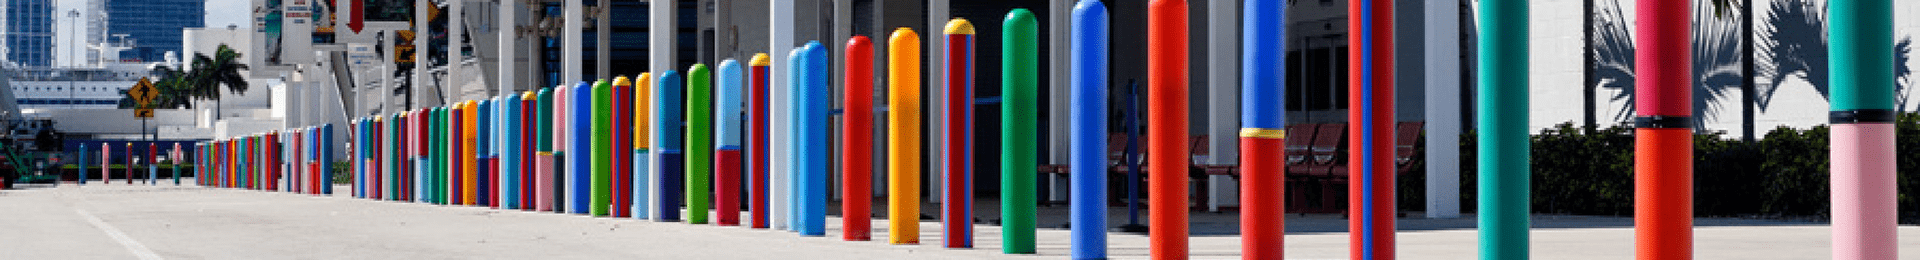 bollards with colorful bollard covers in front of a Port of Miami terminal building